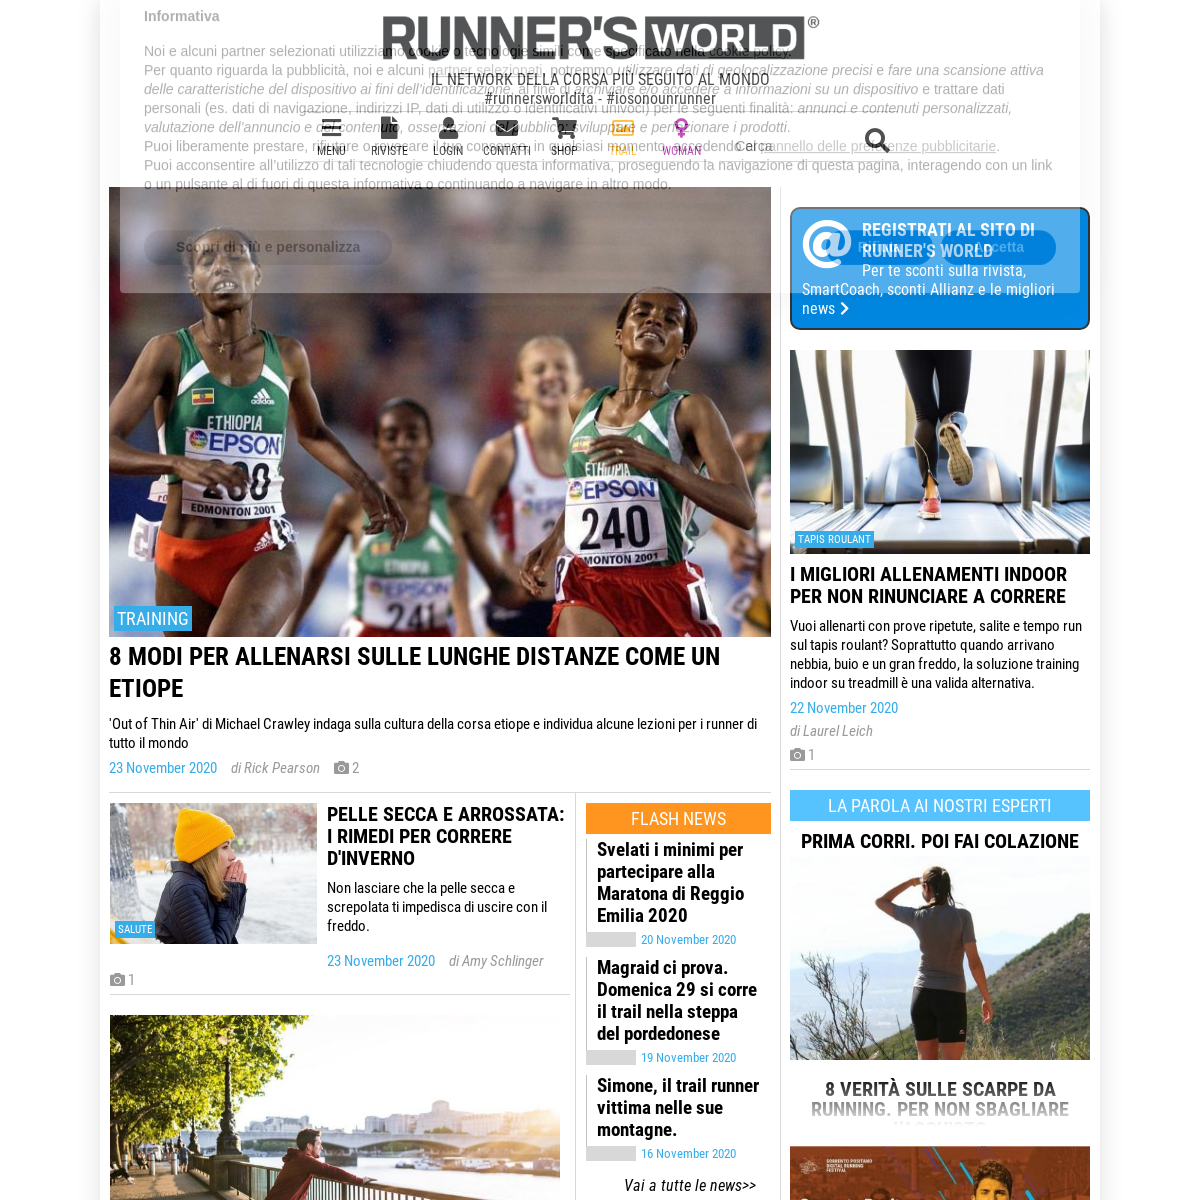 A complete backup of runnersworld.it